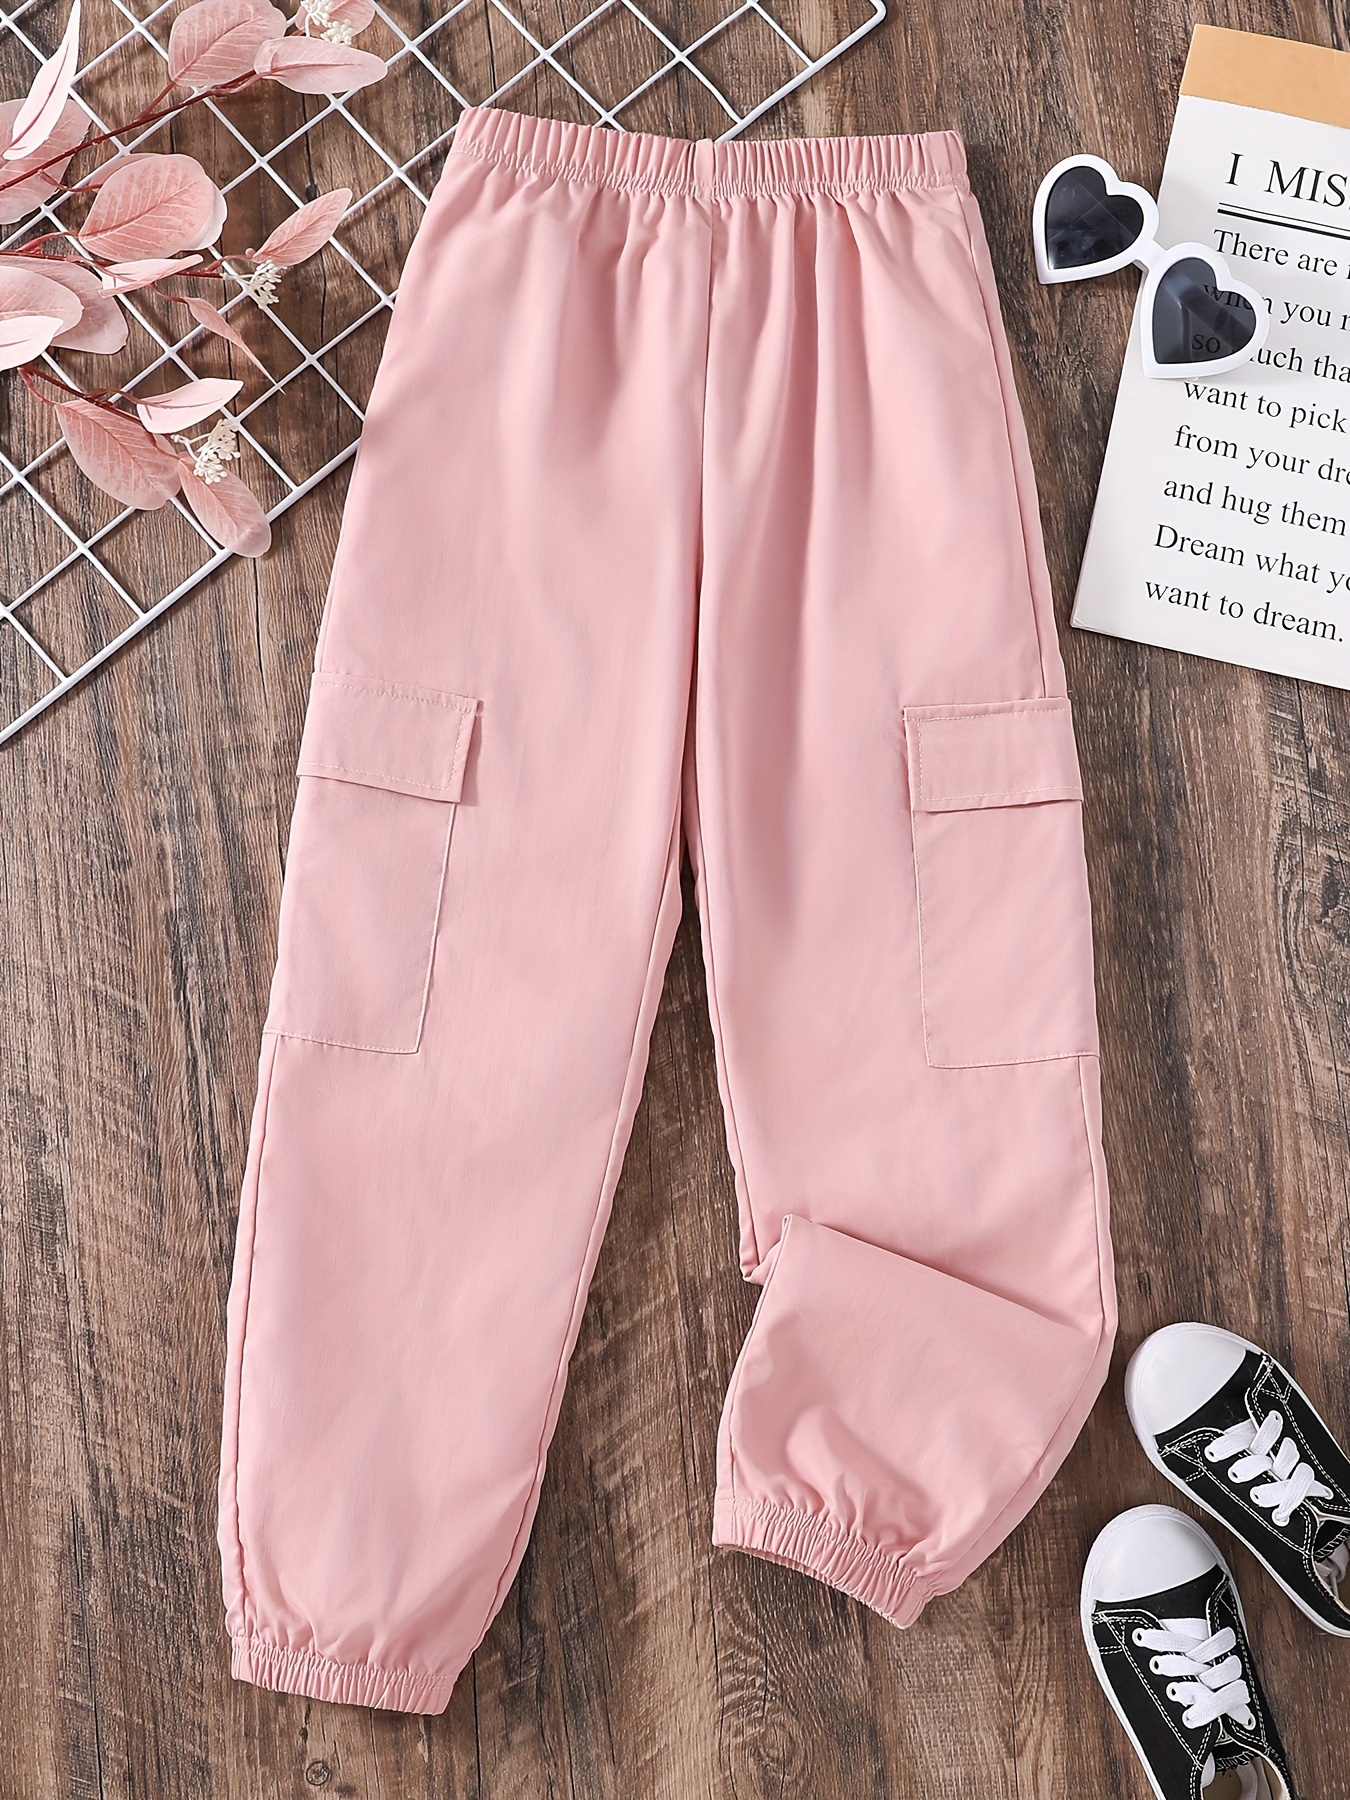 Shop Girls Utility Pants Online - Fast Shipping & Easy Returns